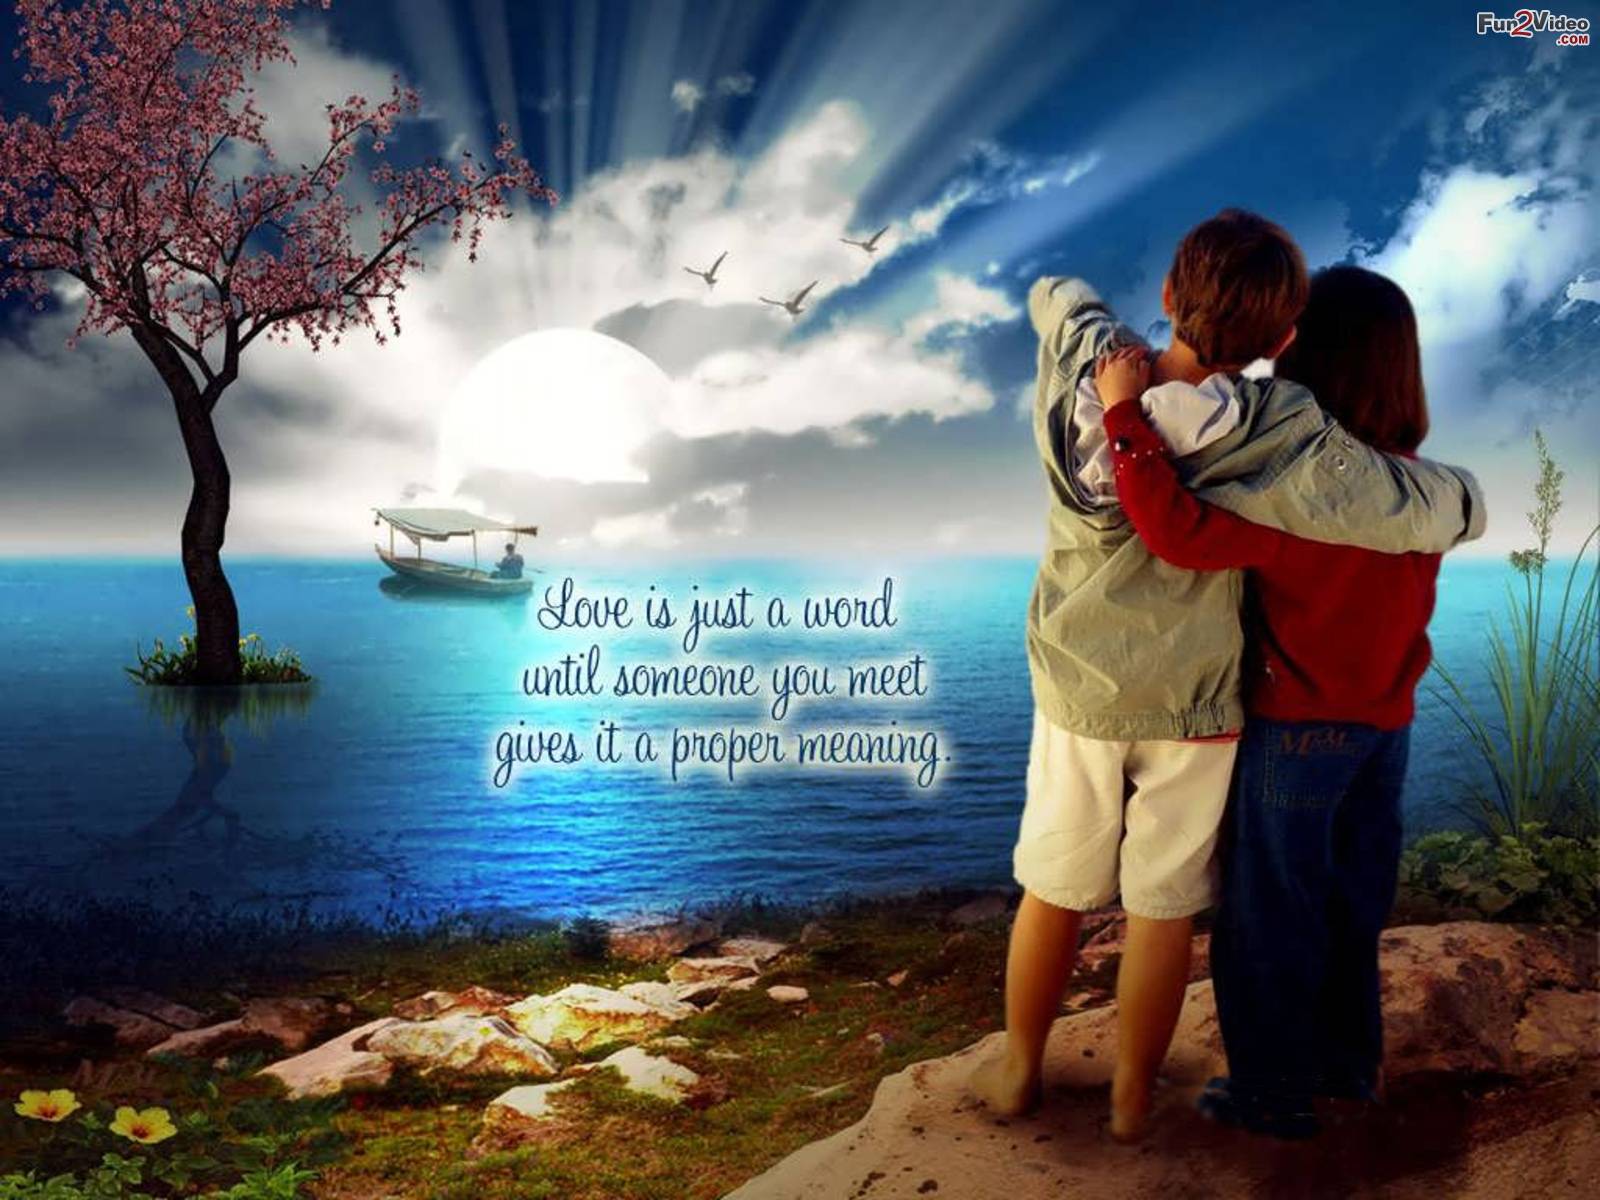  romantic wallpaper with love quotes help you to show love to your